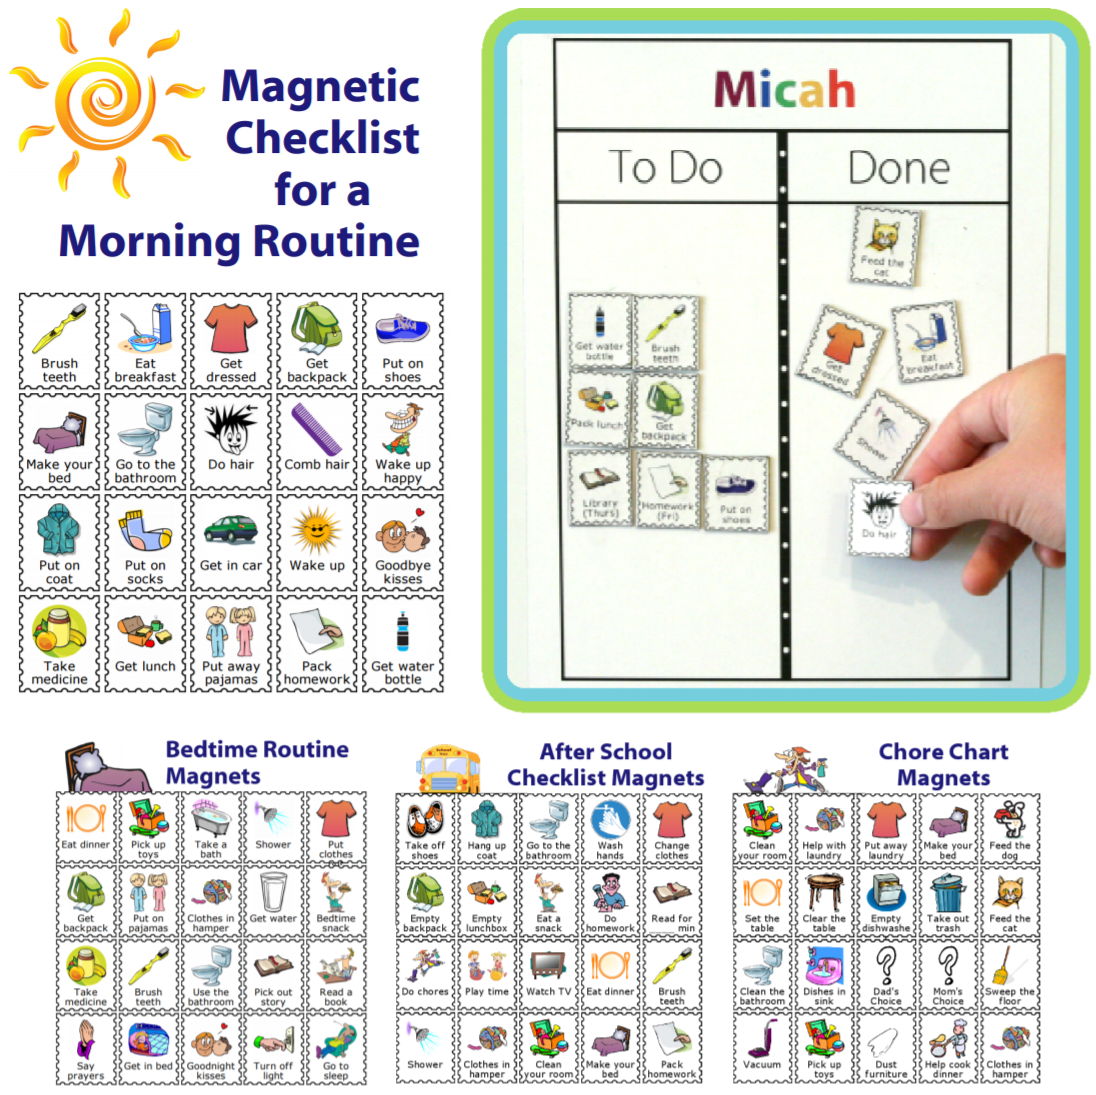 Perfect for setting up a morning routine, an after school checklist, a bedtime routine, or a chore chart. You can even easily print your own magnets!